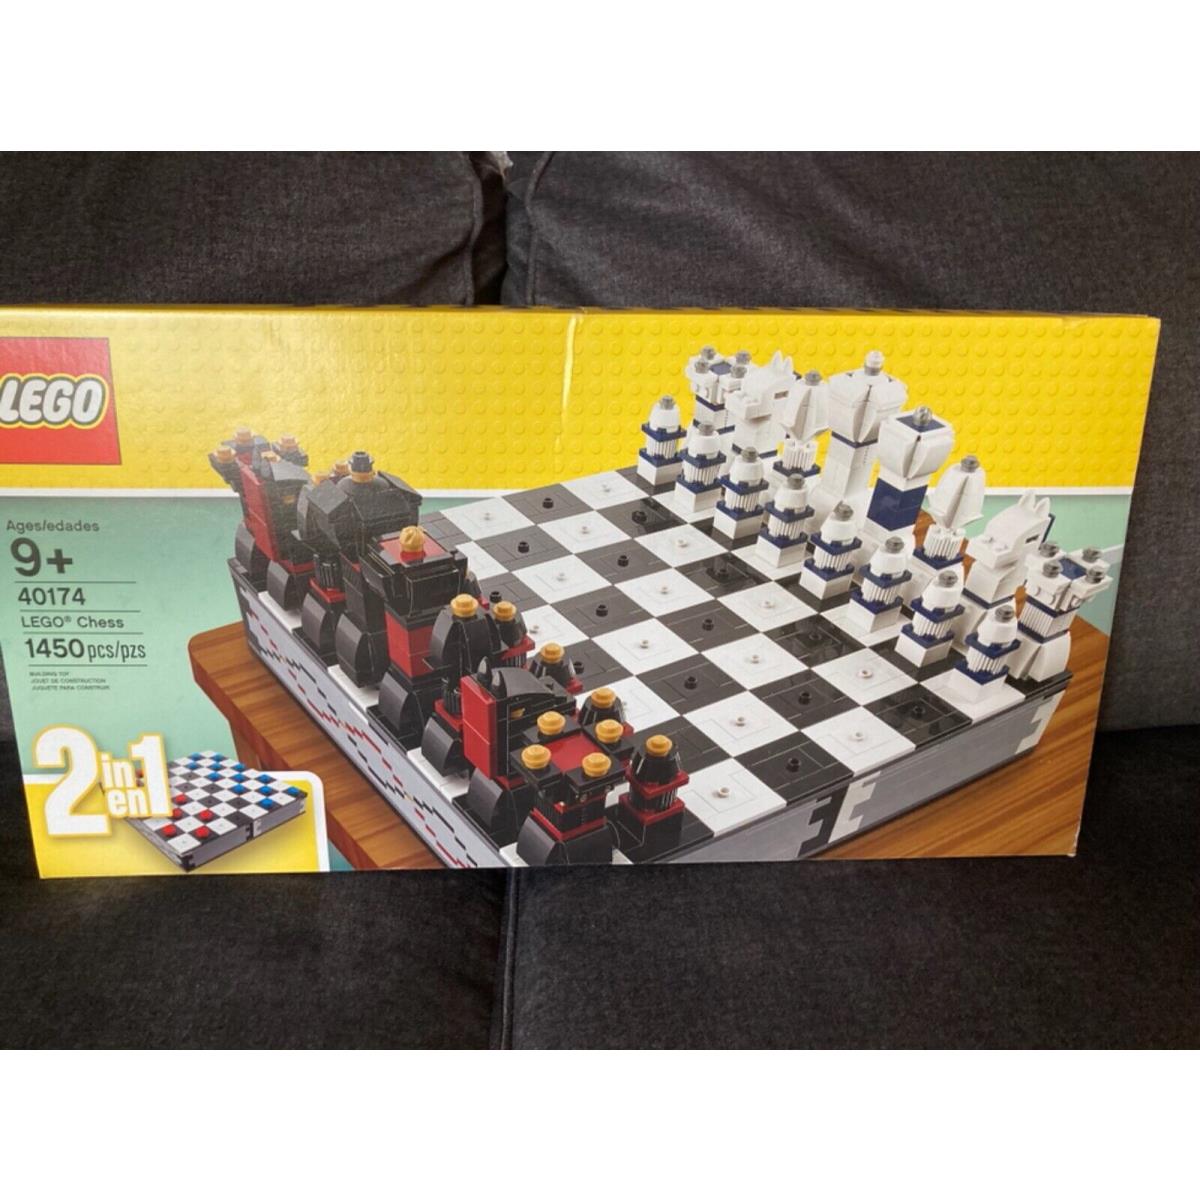 Lego 40174 Iconic Chess + Checkers Set Never Opened 1450 pc